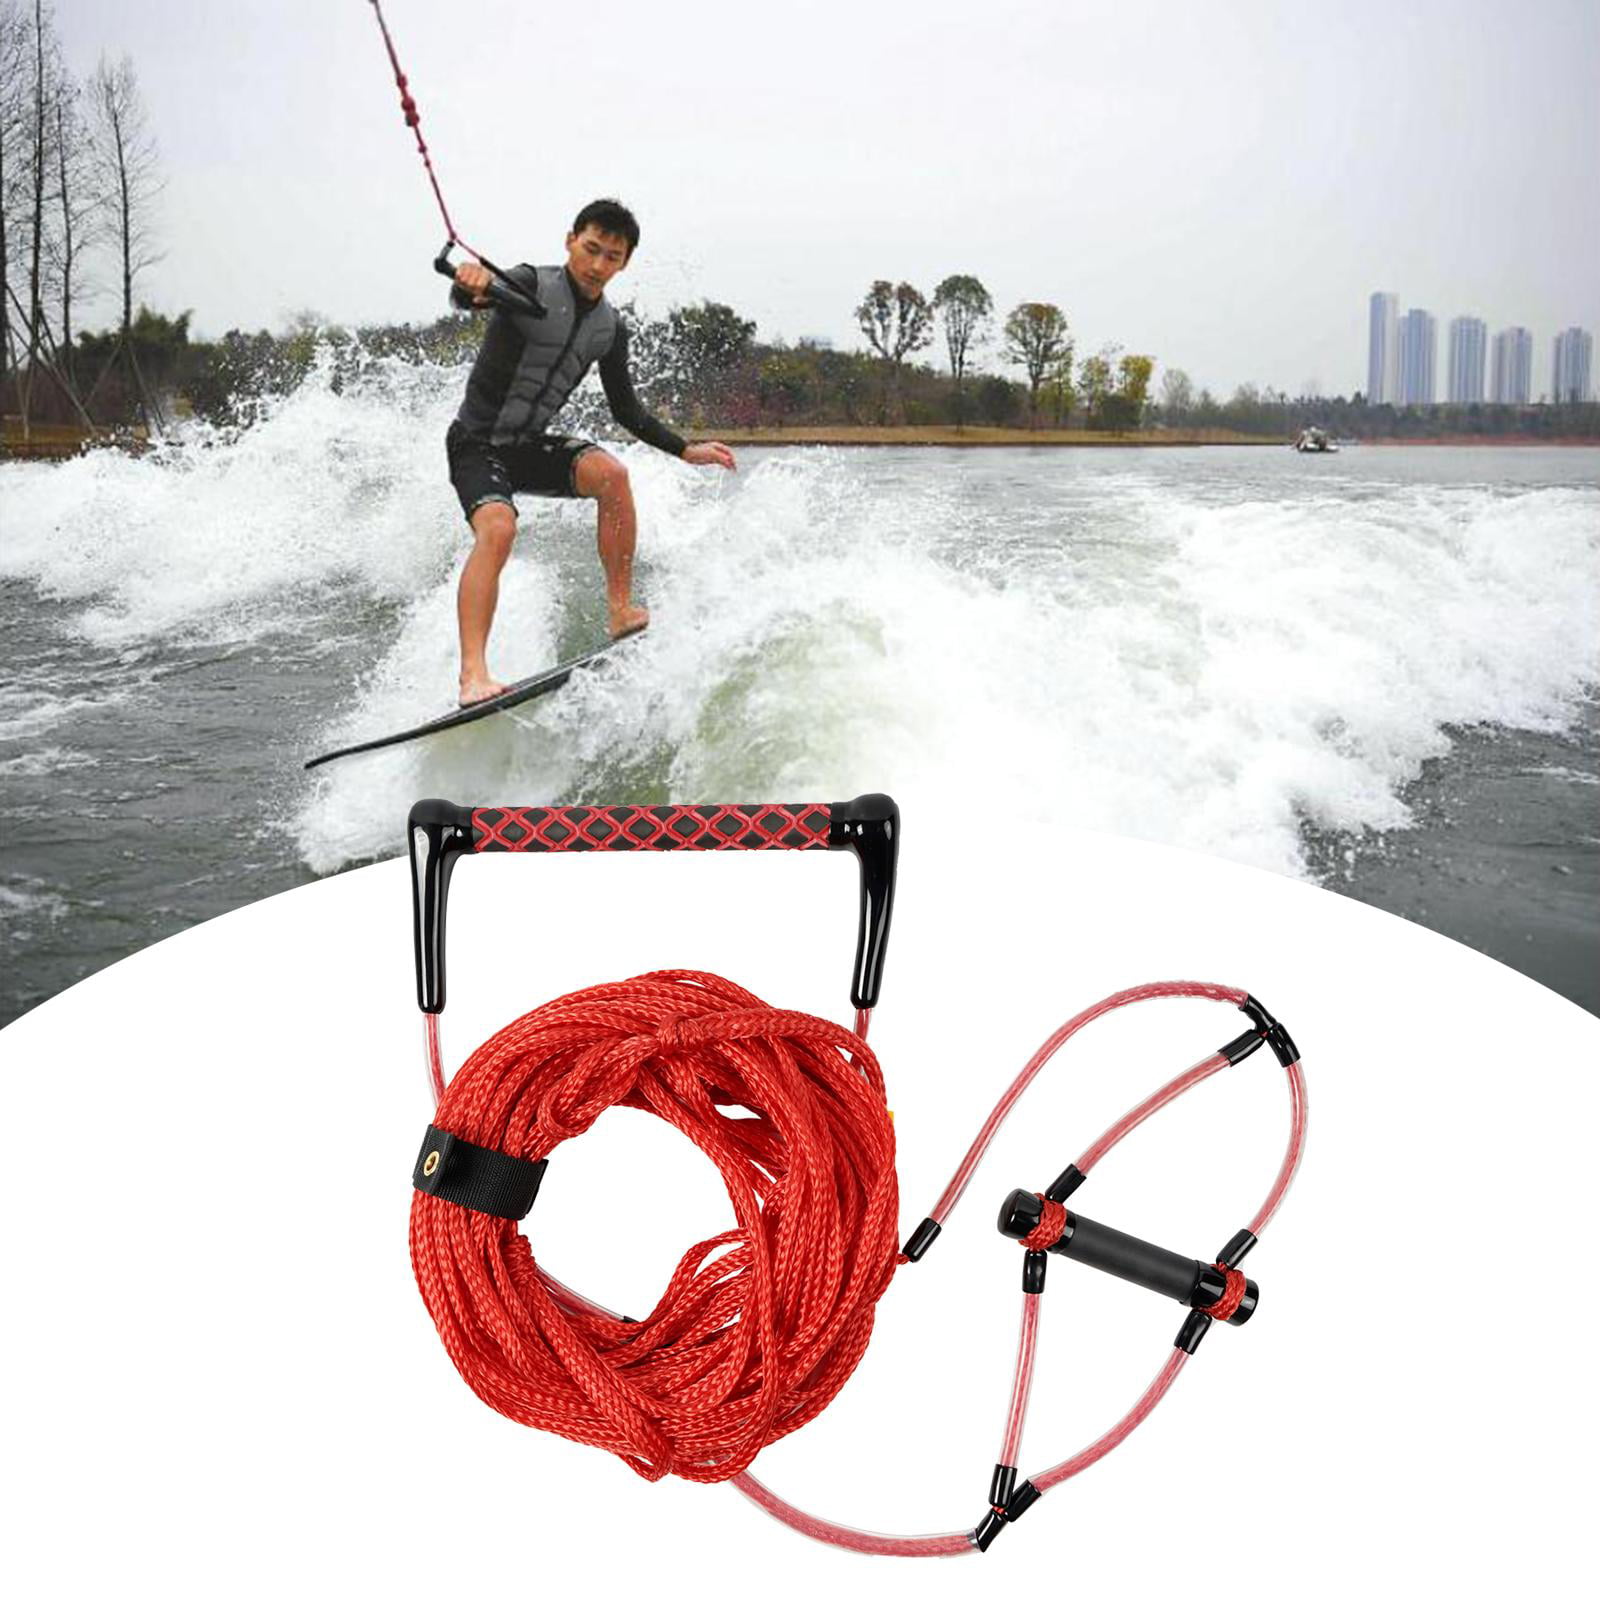 Obcursco Premium Wakeboard Rope with EVA Handle White and Red, 70ft Long Wakeboard and kneeboard Perfect for Water Sport 